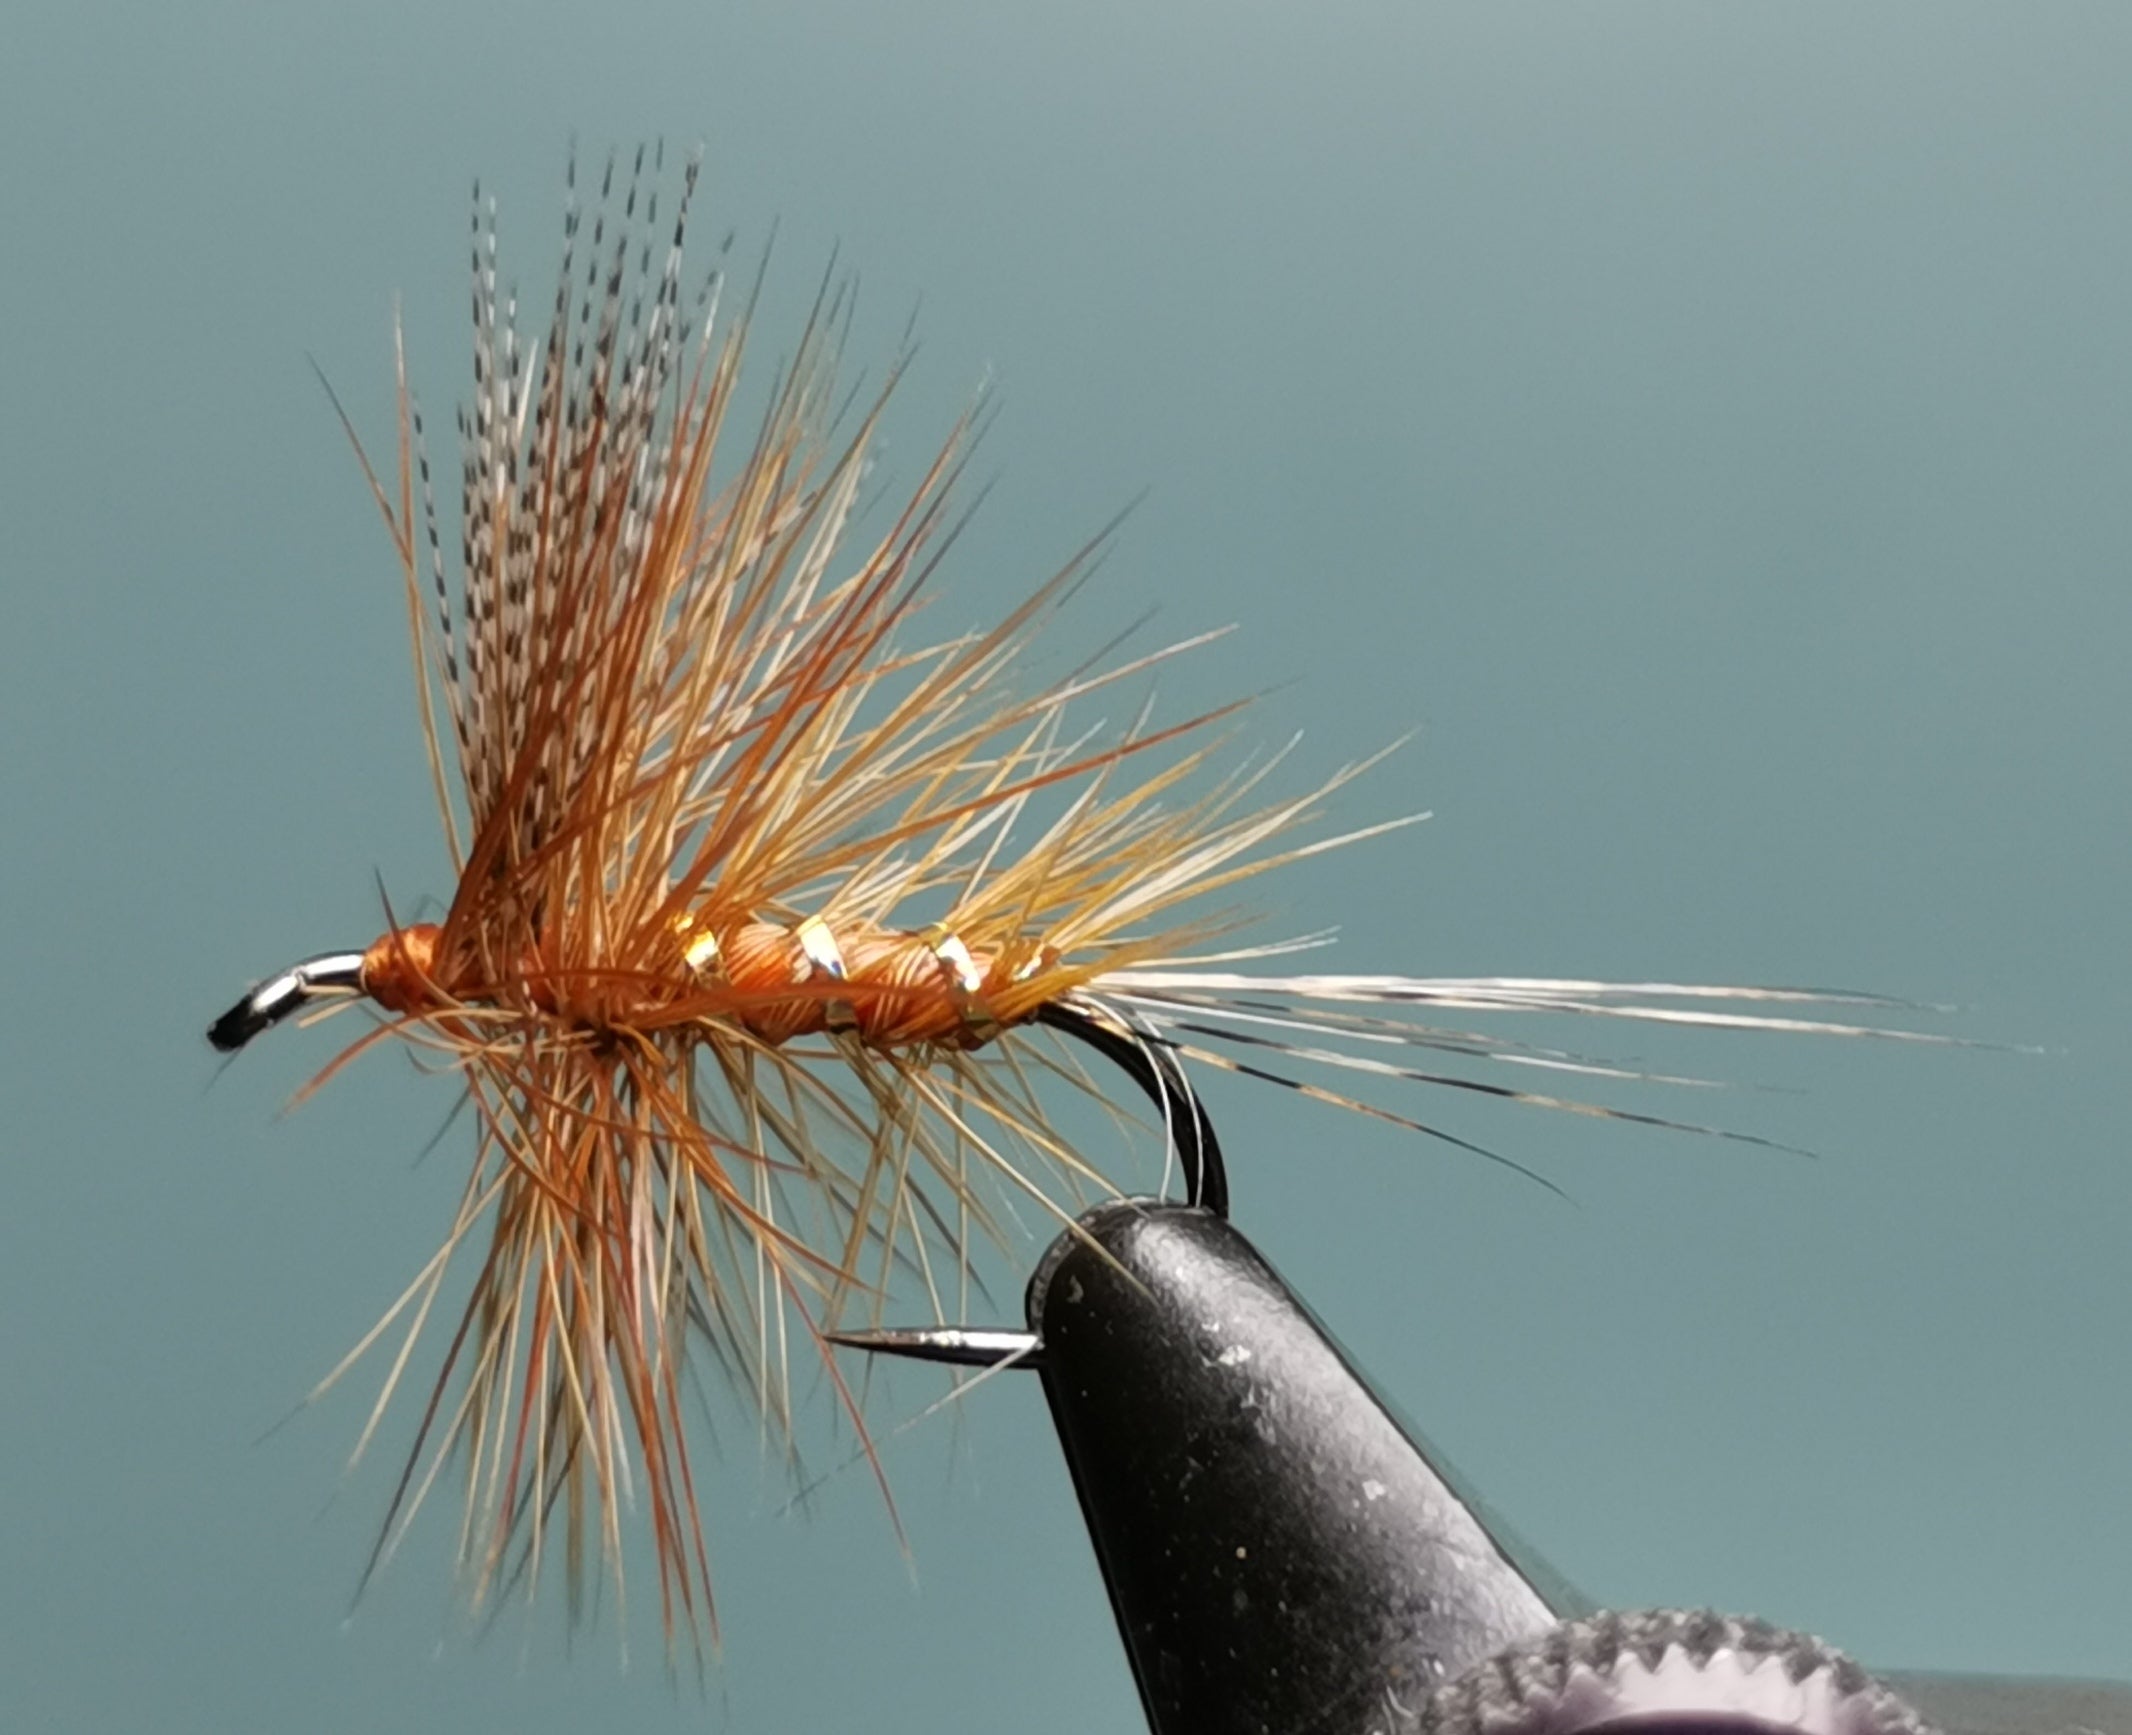 Catskill style dry flies - Queen of the Water | Fly Fishing Forum